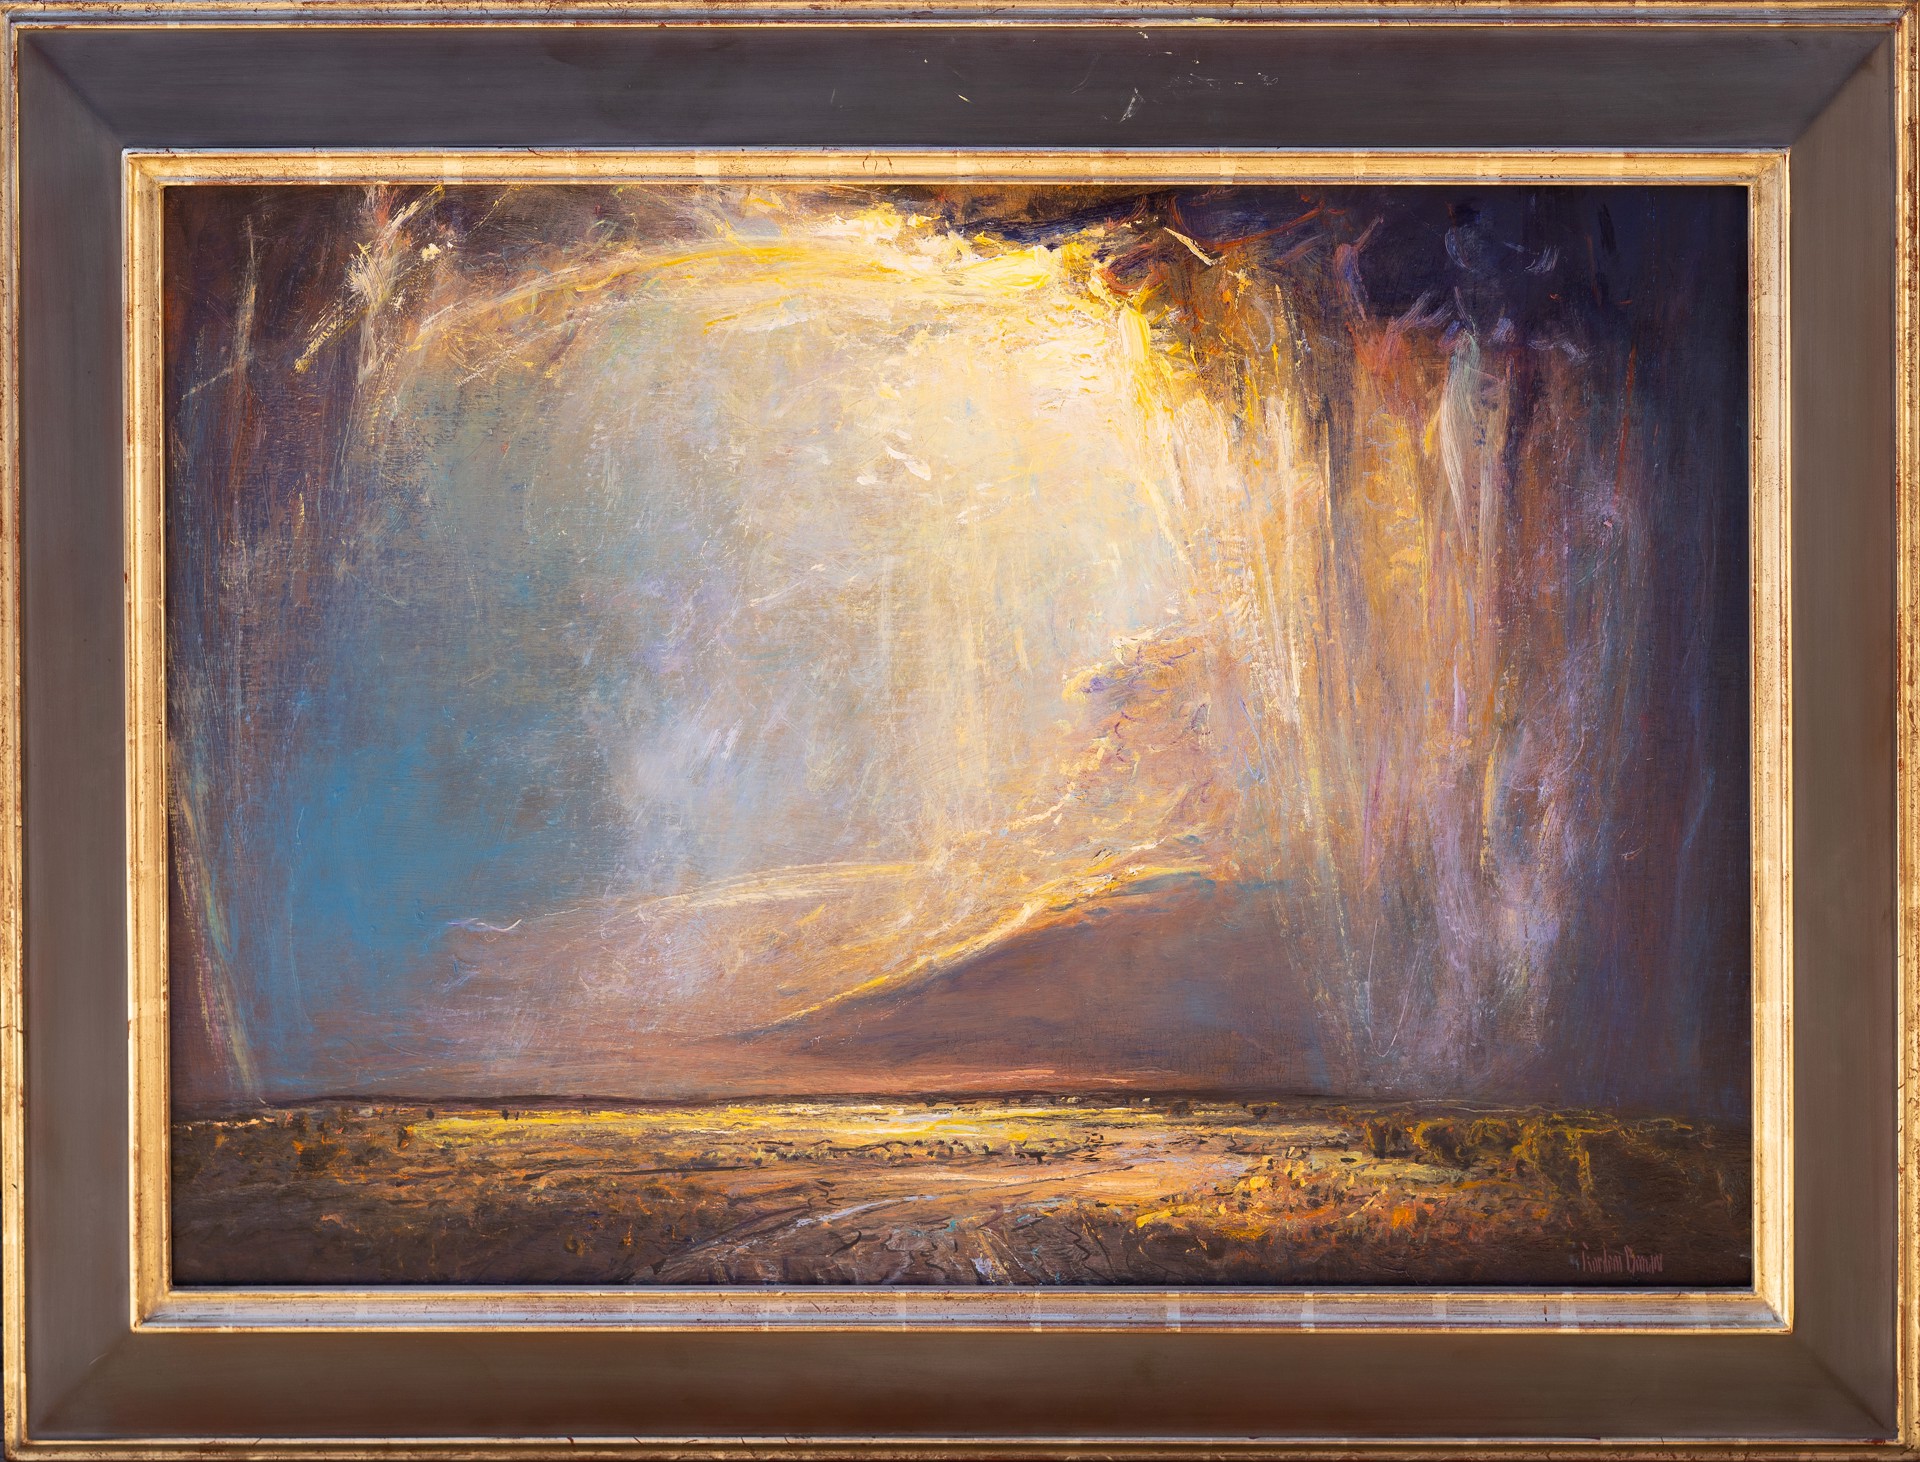 Light in the Storm by Gordon Brown